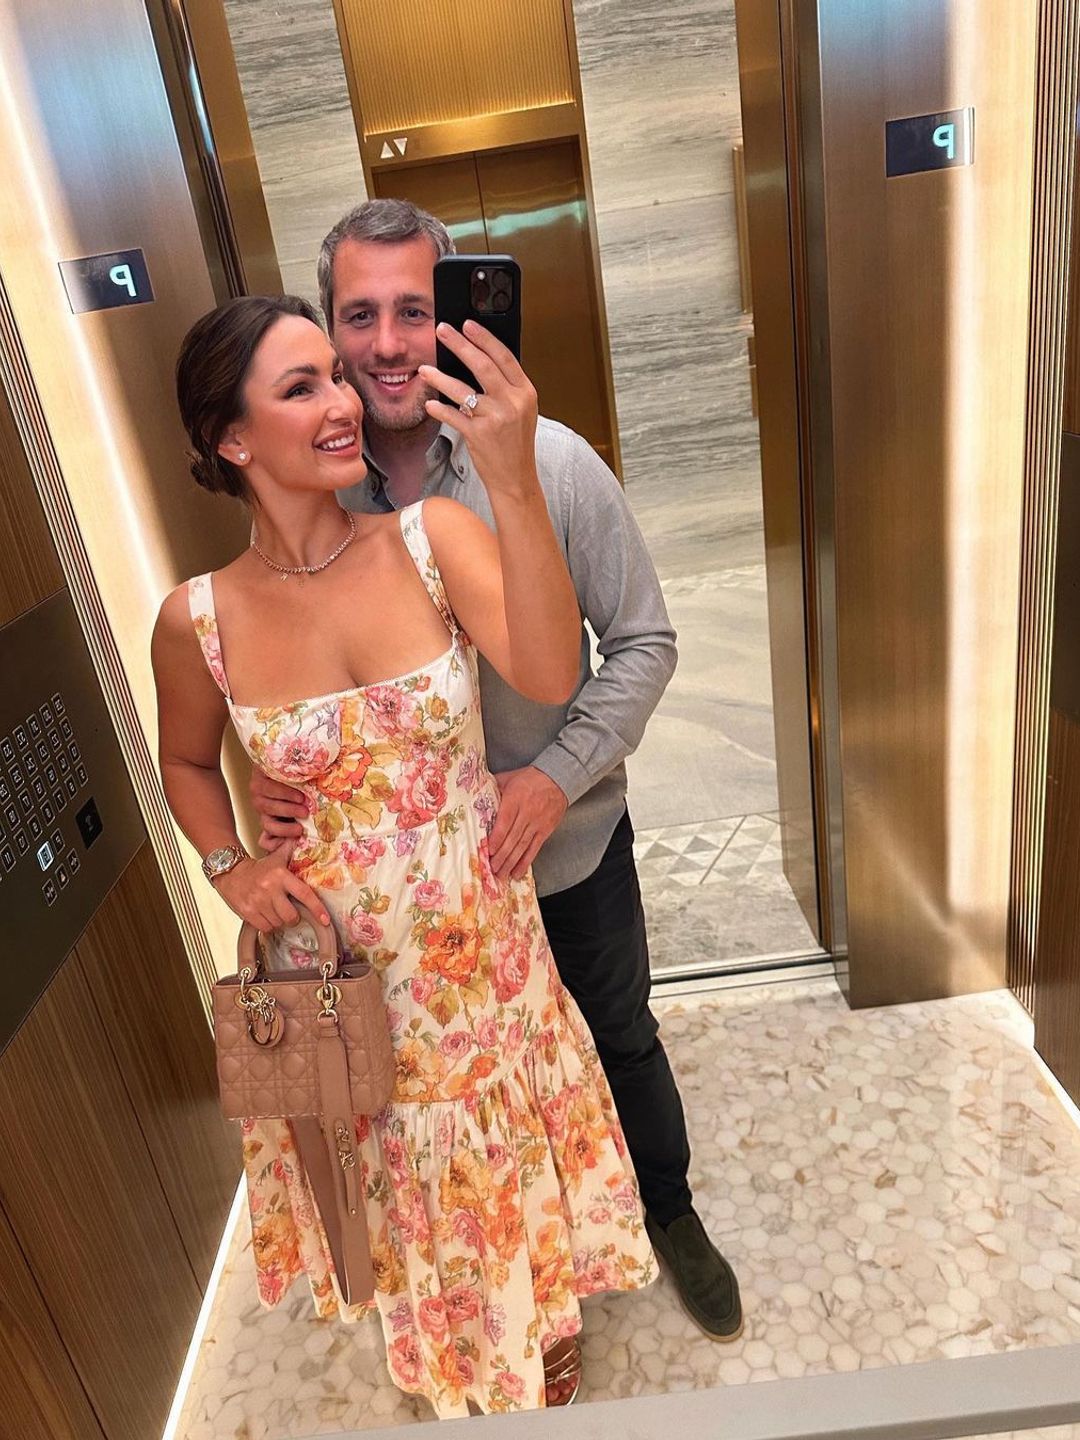 Sam Faiers wearing a diamond ring and floral dress in a mirror selfie with Paul